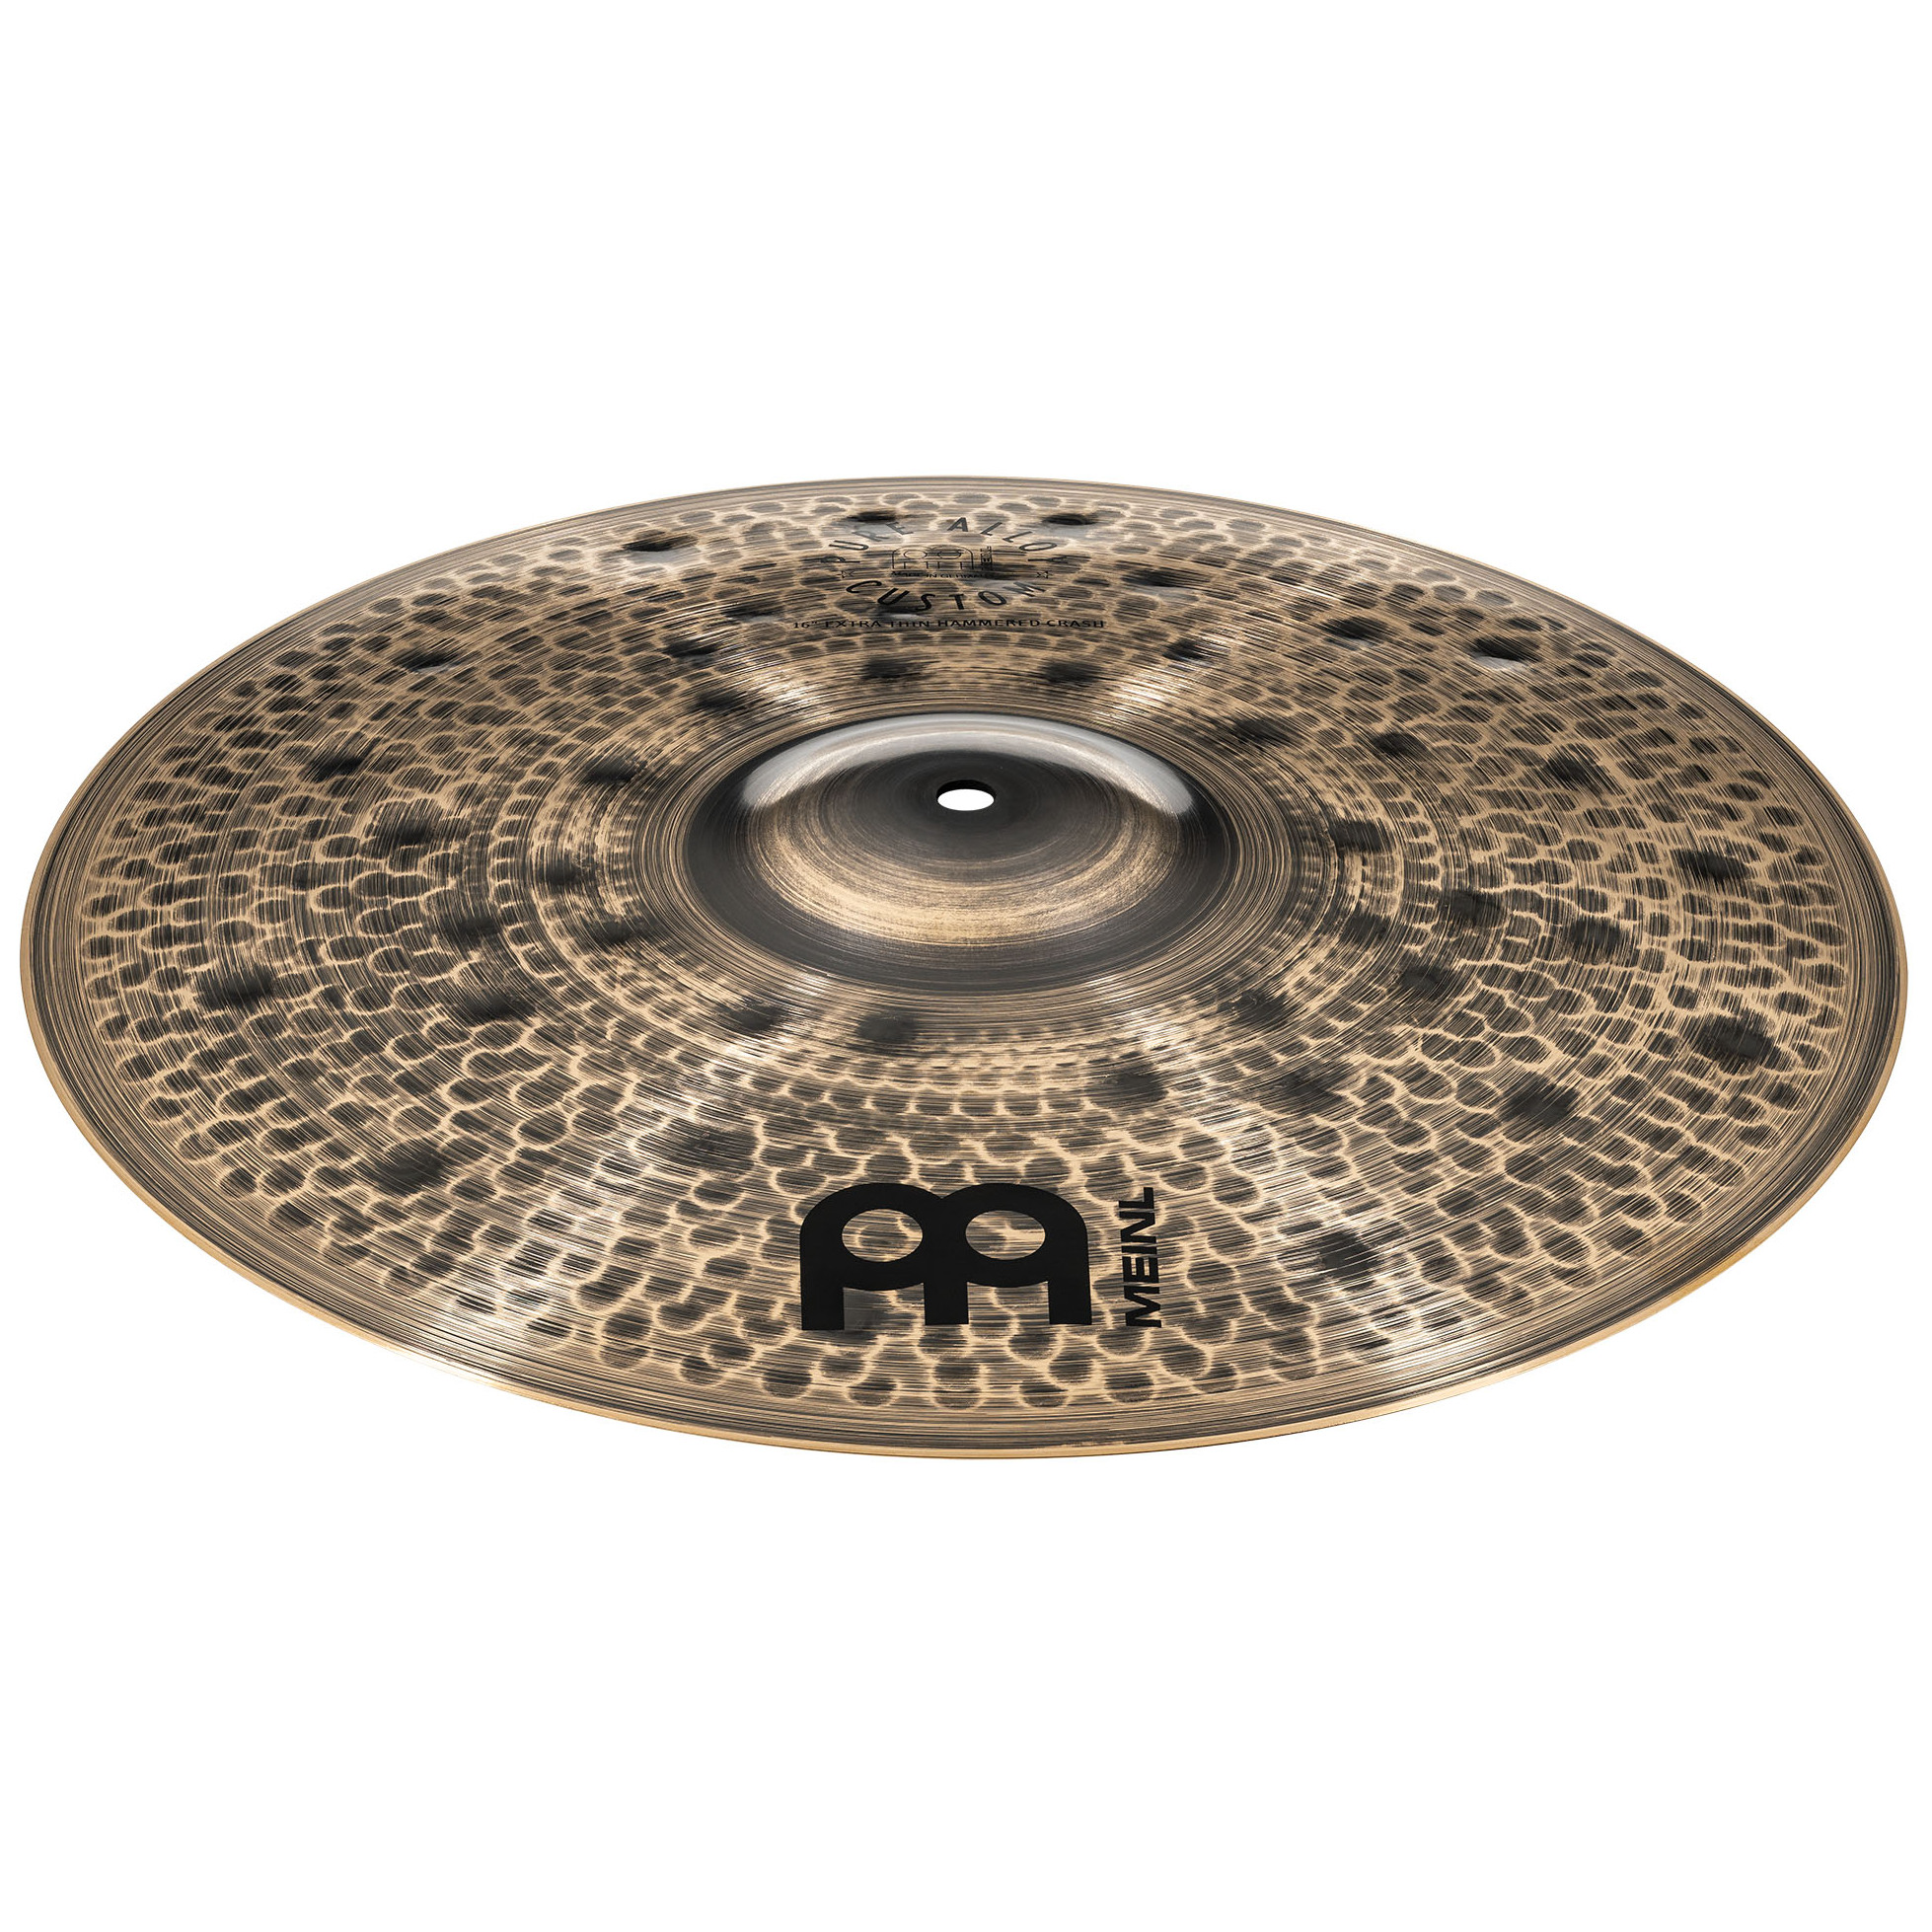 Meinl Cymbals PAC16ETH - 16" Pure Alloy Custom Extra Thin Hammered Crash 2